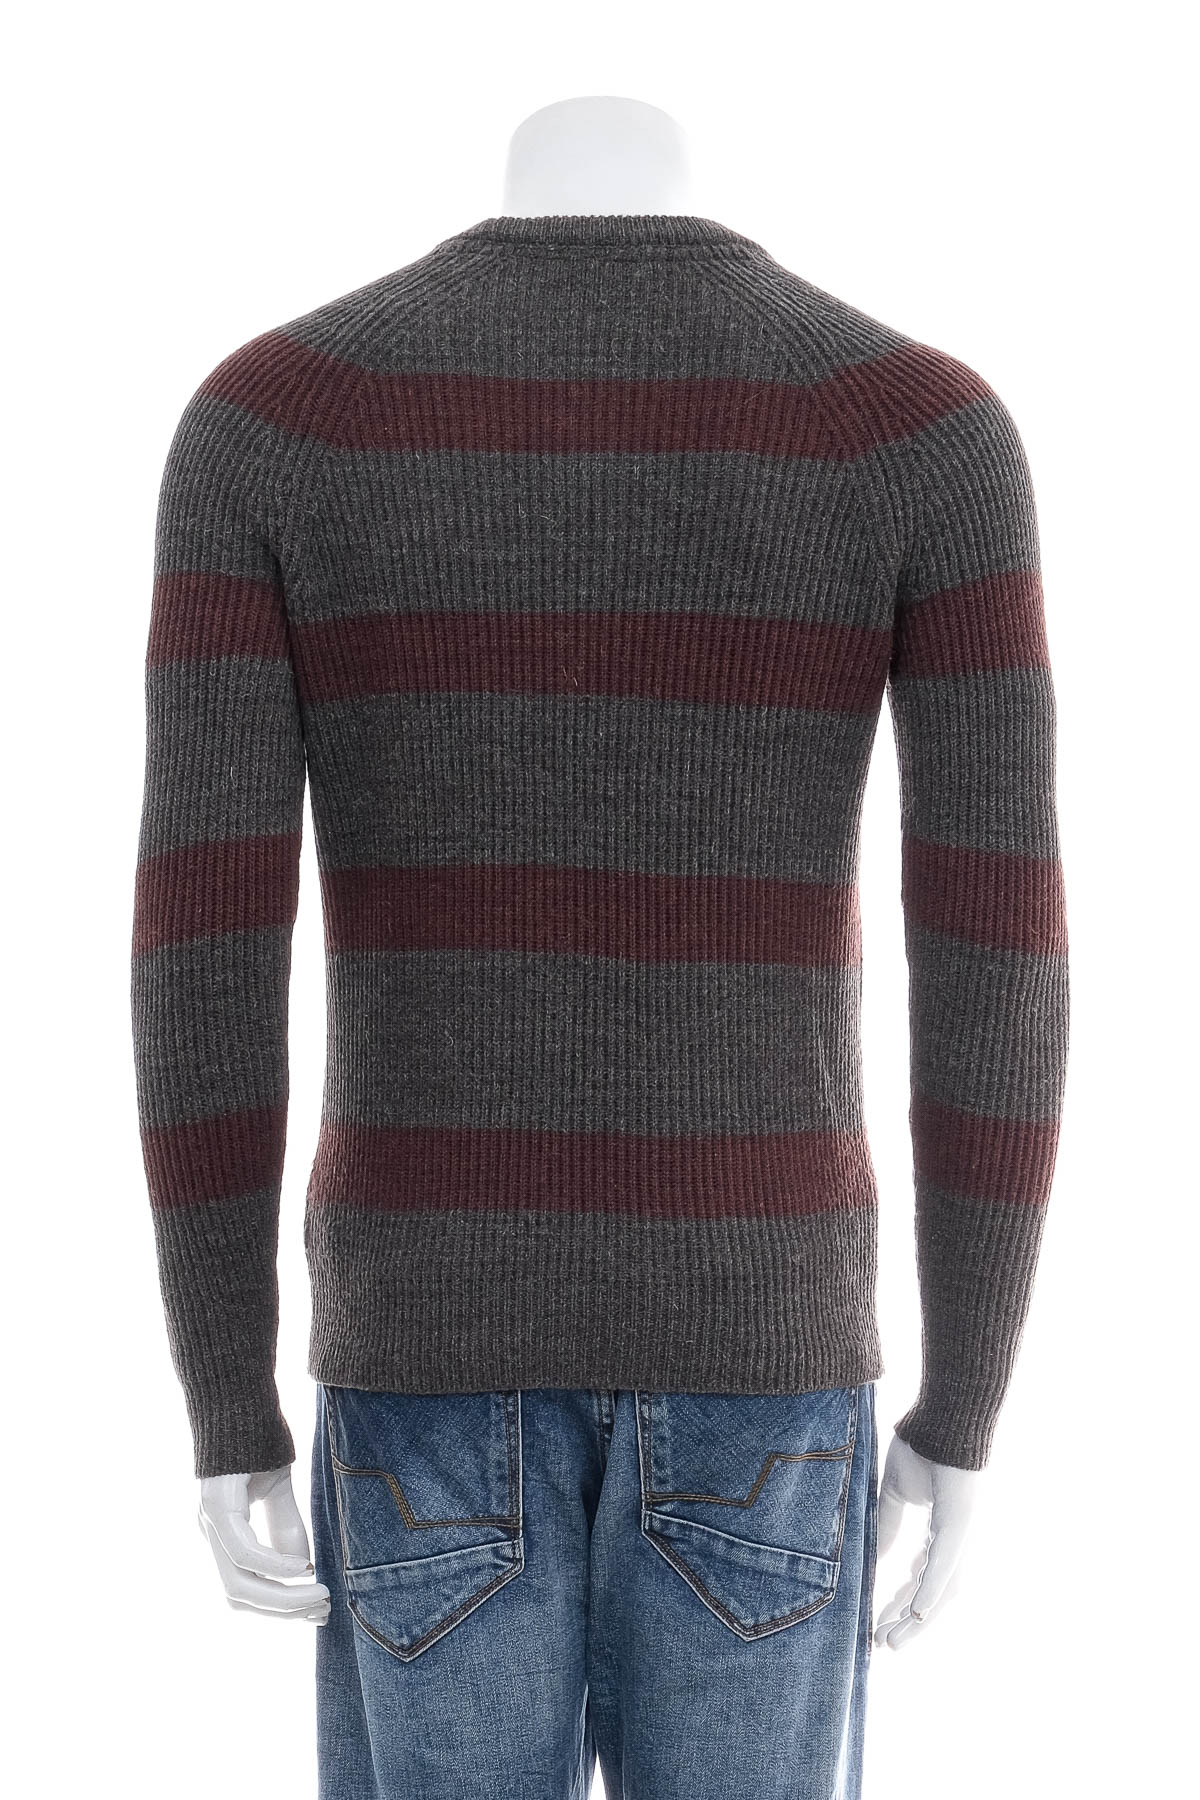 Men's sweater - DIVIDED - 1